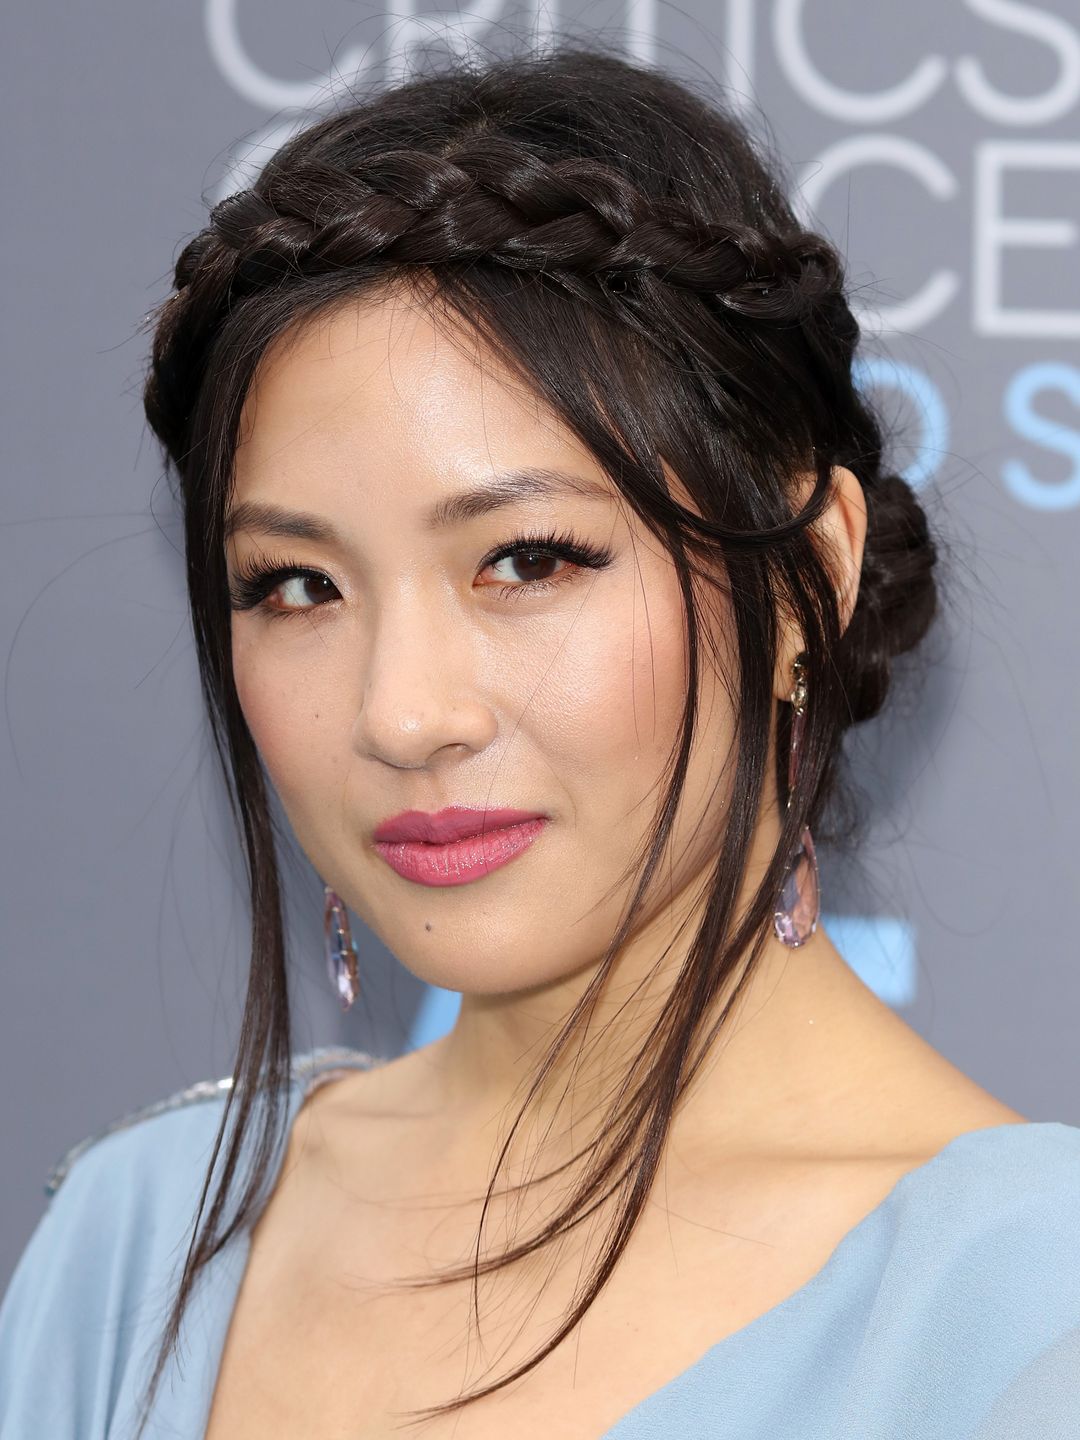 Constance Wu young photos